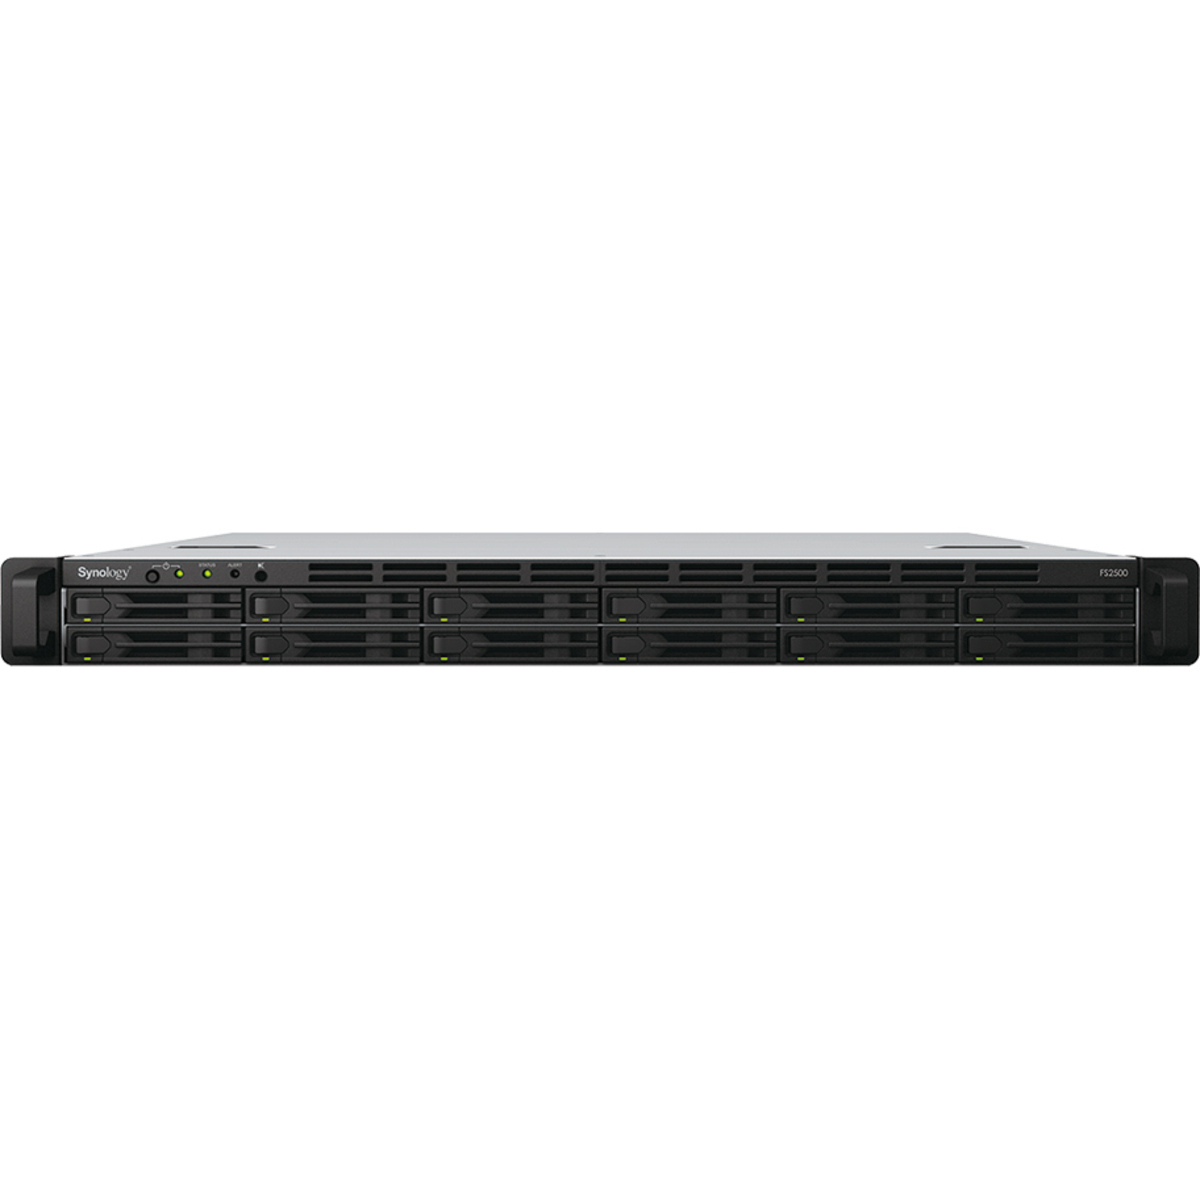 Synology FlashStation FS2500 19.2tb 12-Bay RackMount Large Business / Enterprise NAS - Network Attached Storage Device 10x1.9tb Synology SAT5210 Series SAT5210-1920G 2.5 530/500MB/s SATA 6Gb/s SSD ENTERPRISE Class Drives Installed - Burn-In Tested - FREE RAM UPGRADE FlashStation FS2500